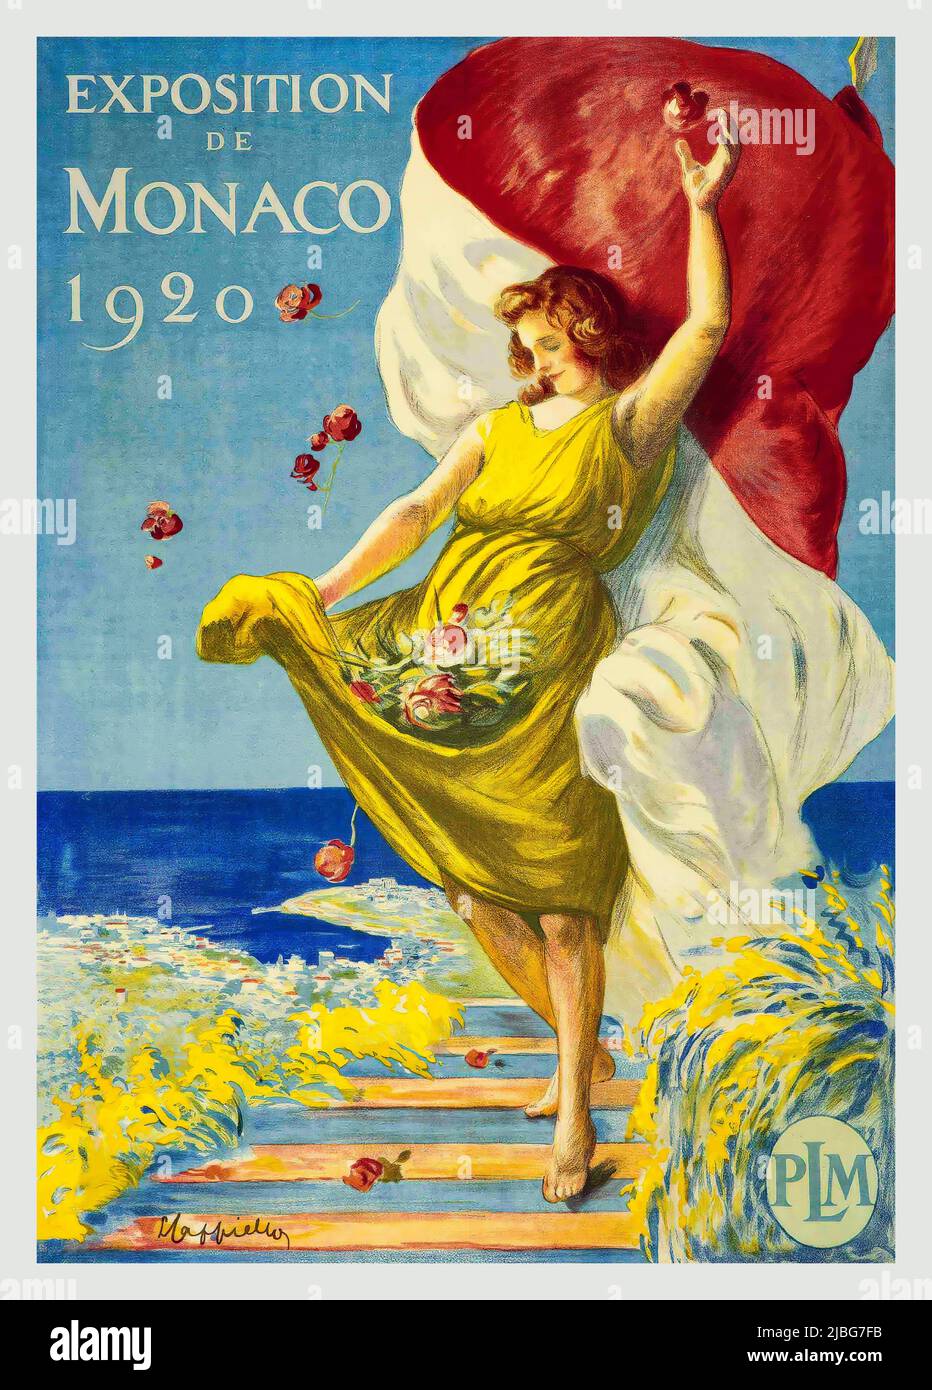 A turn of the 20th century advertising poster by Leonetto Cappiello (1875-1942), for the Monaco Exhibition of 1920, we are presented with an allegorical figure personifying the bounty of the Riviera.The exhibition pays tribute to the friendship between Prince Albert I and King Dom Carlos of Portugal and showcases the voyages and expeditions undertaken by Prince Albert I in Portugal (Madeira, Azores and Lisbon). Stock Photo